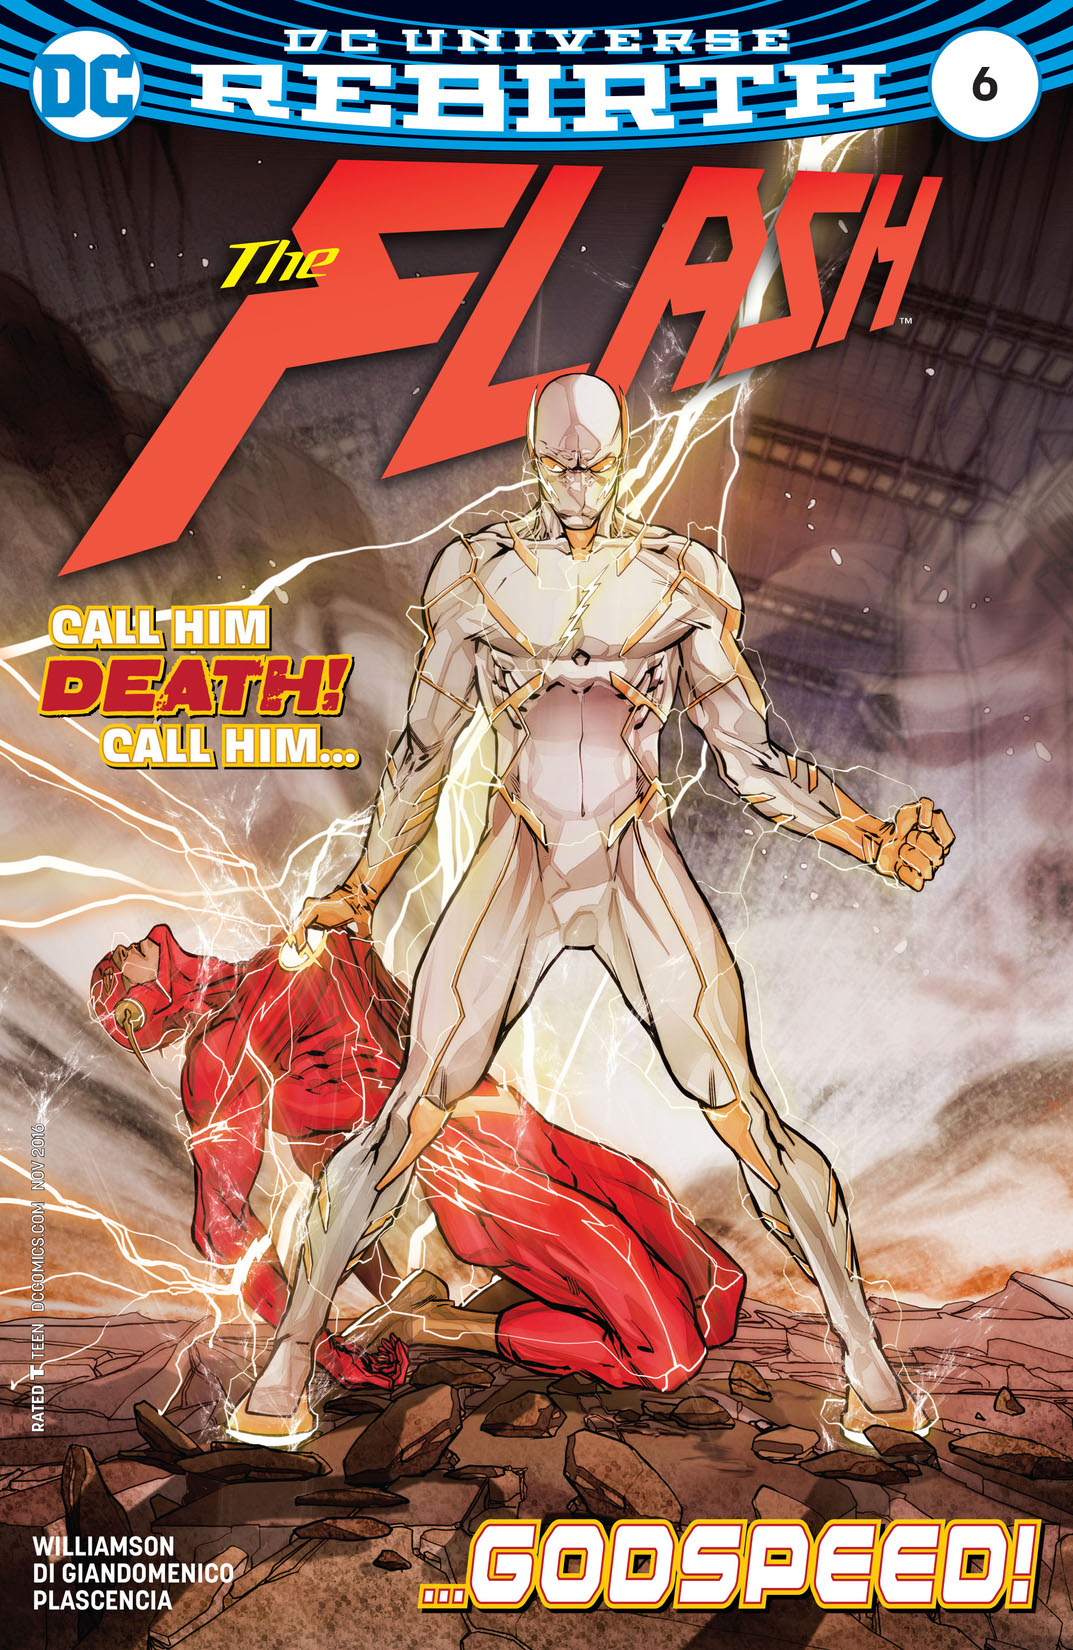 The Flash (2016-) #6 preview images